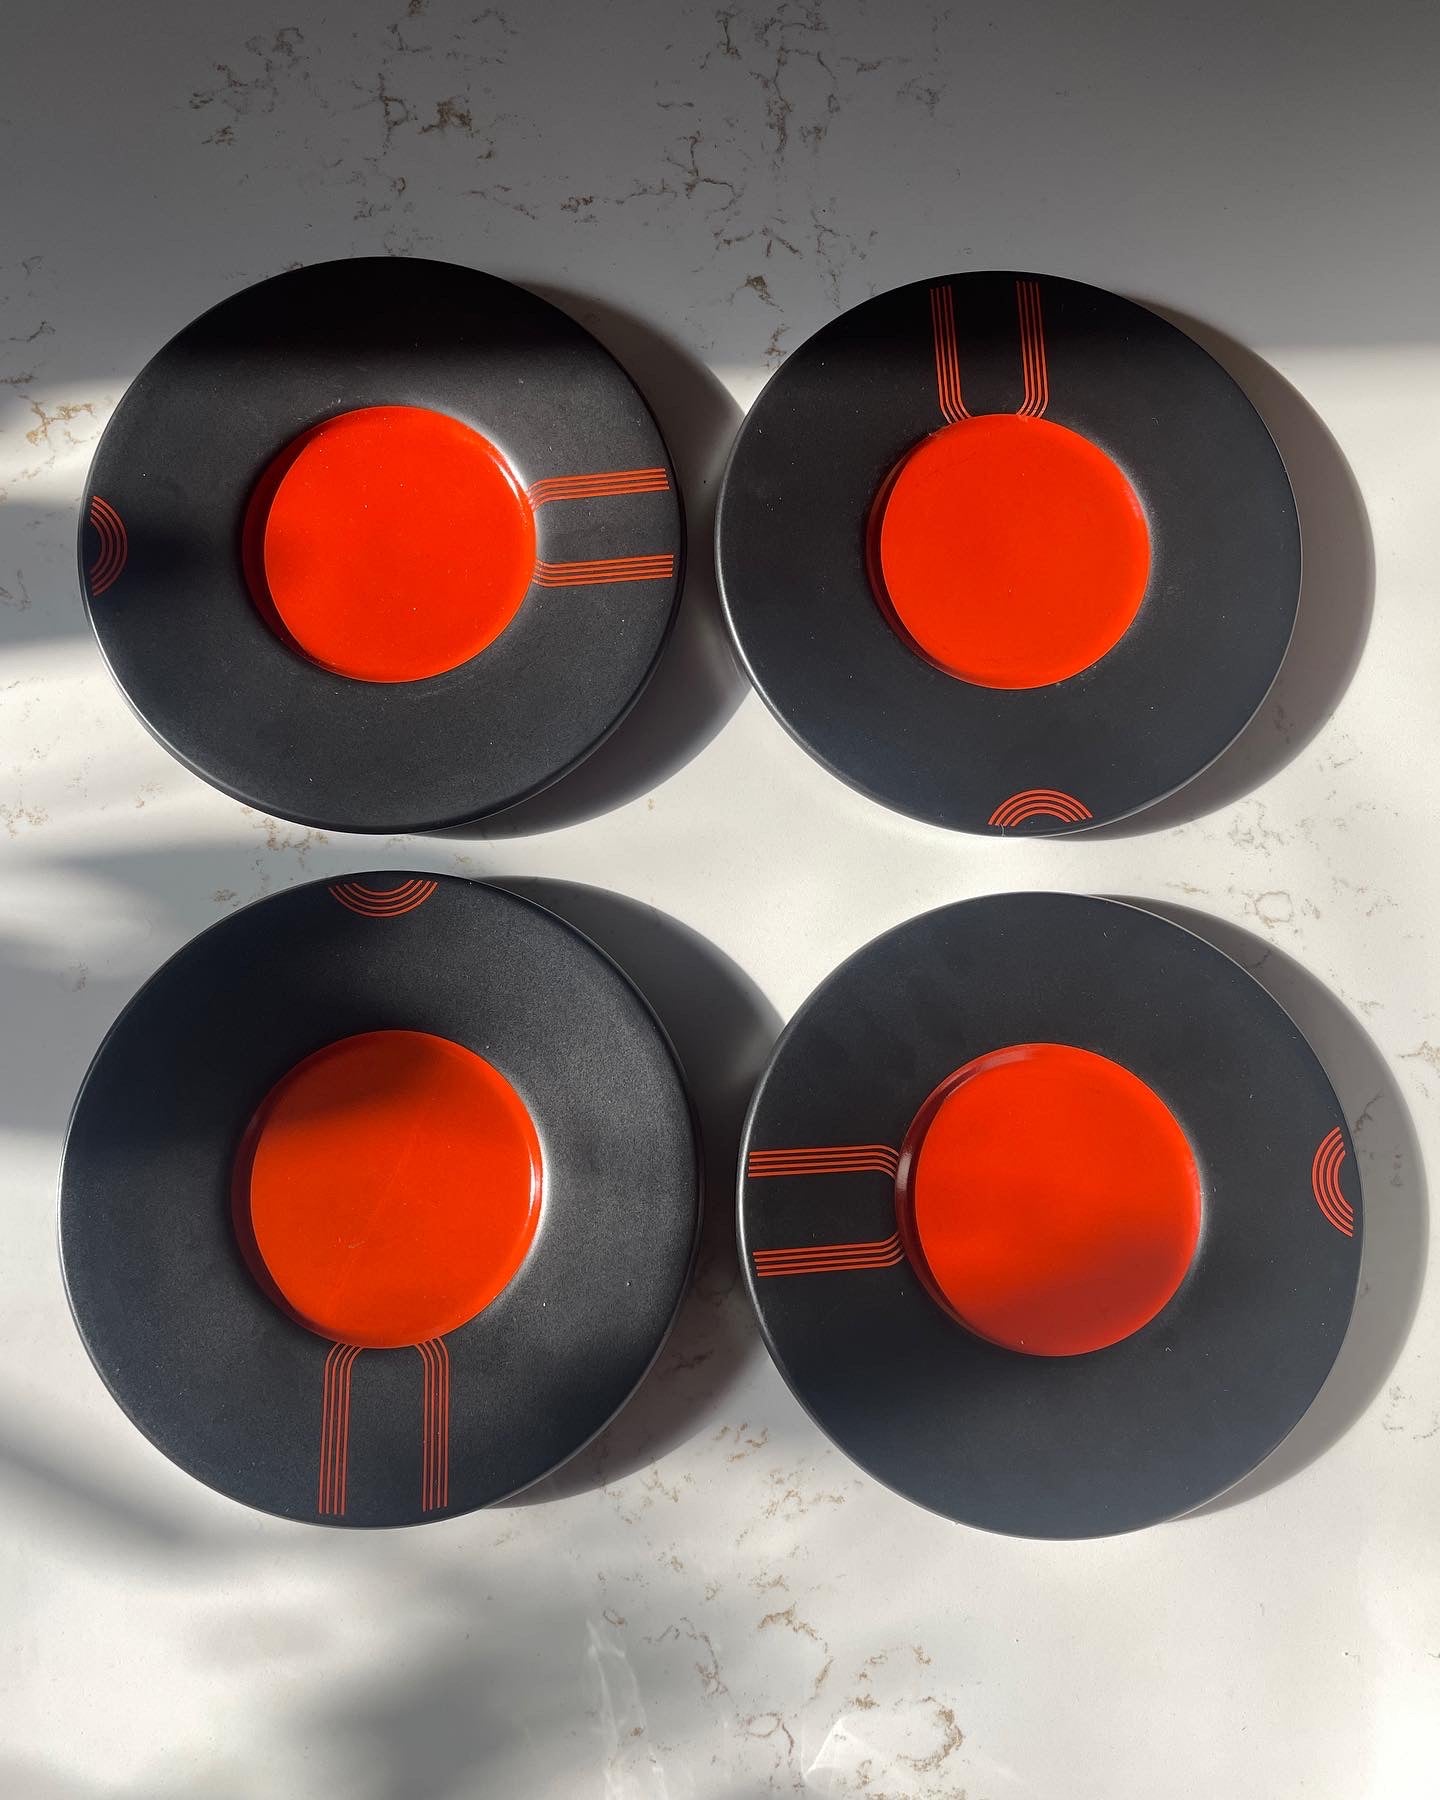 Vintage Ikea Record Player Appetizer Plates